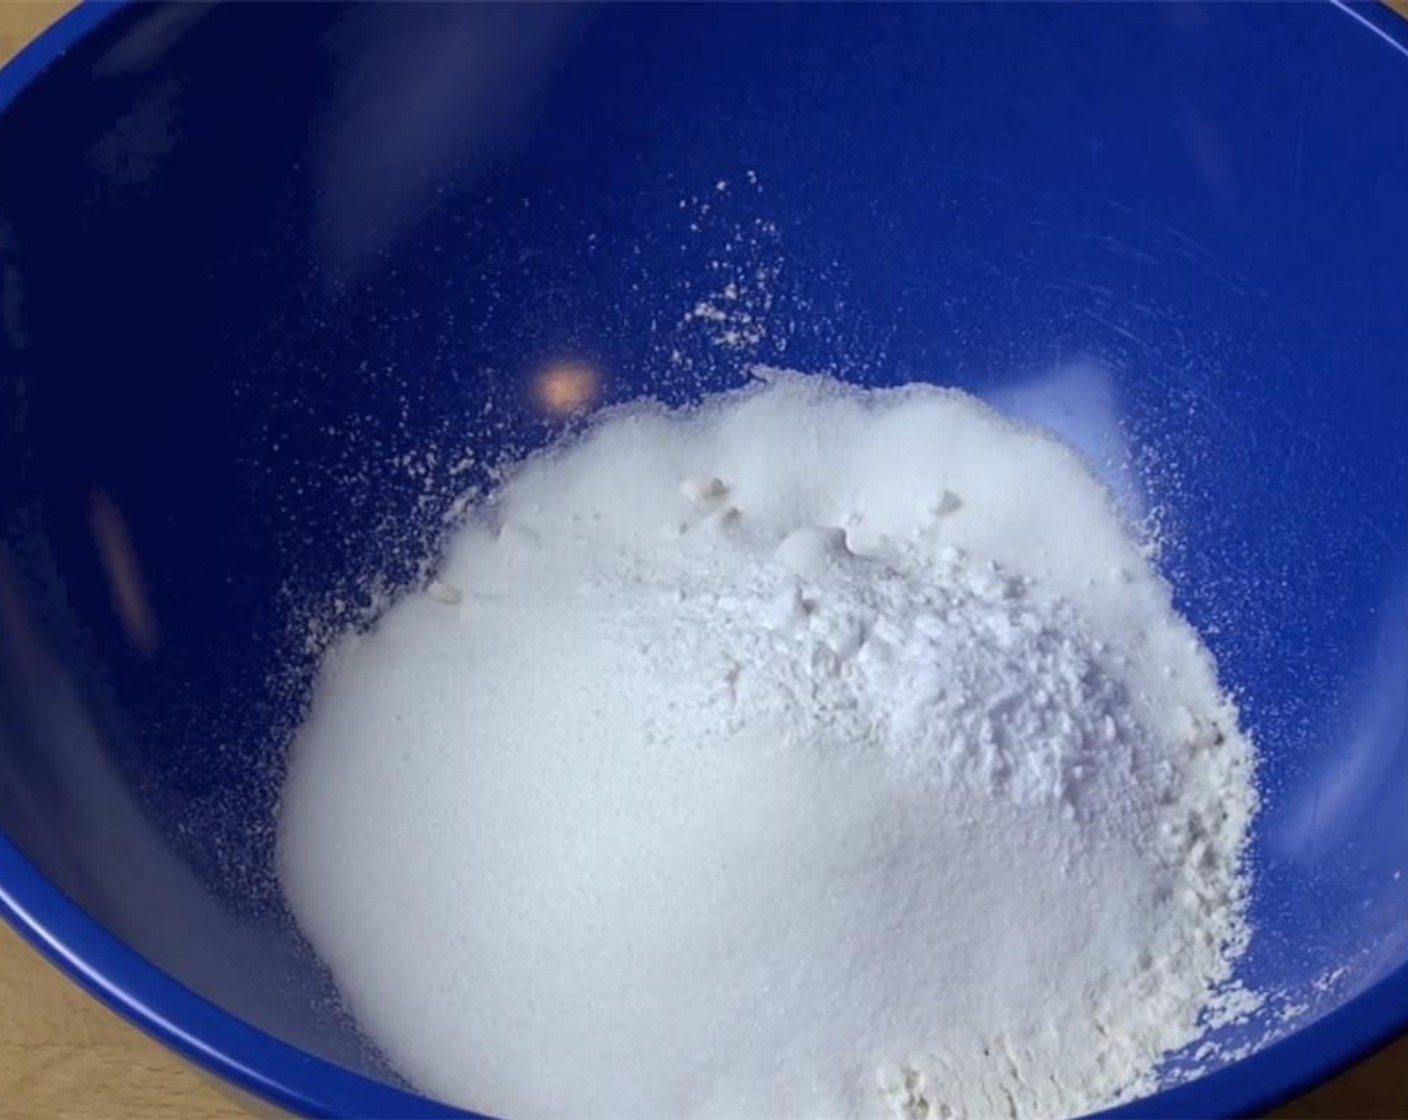 step 1 In a mixing bowl, combine the All-Purpose Flour (1 cup), Caster Sugar (1/3 cup), Baking Powder (3/4 tsp), and Baking Soda (3/4 tsp). Preheat your oven to 190 degrees C (375 degrees F).